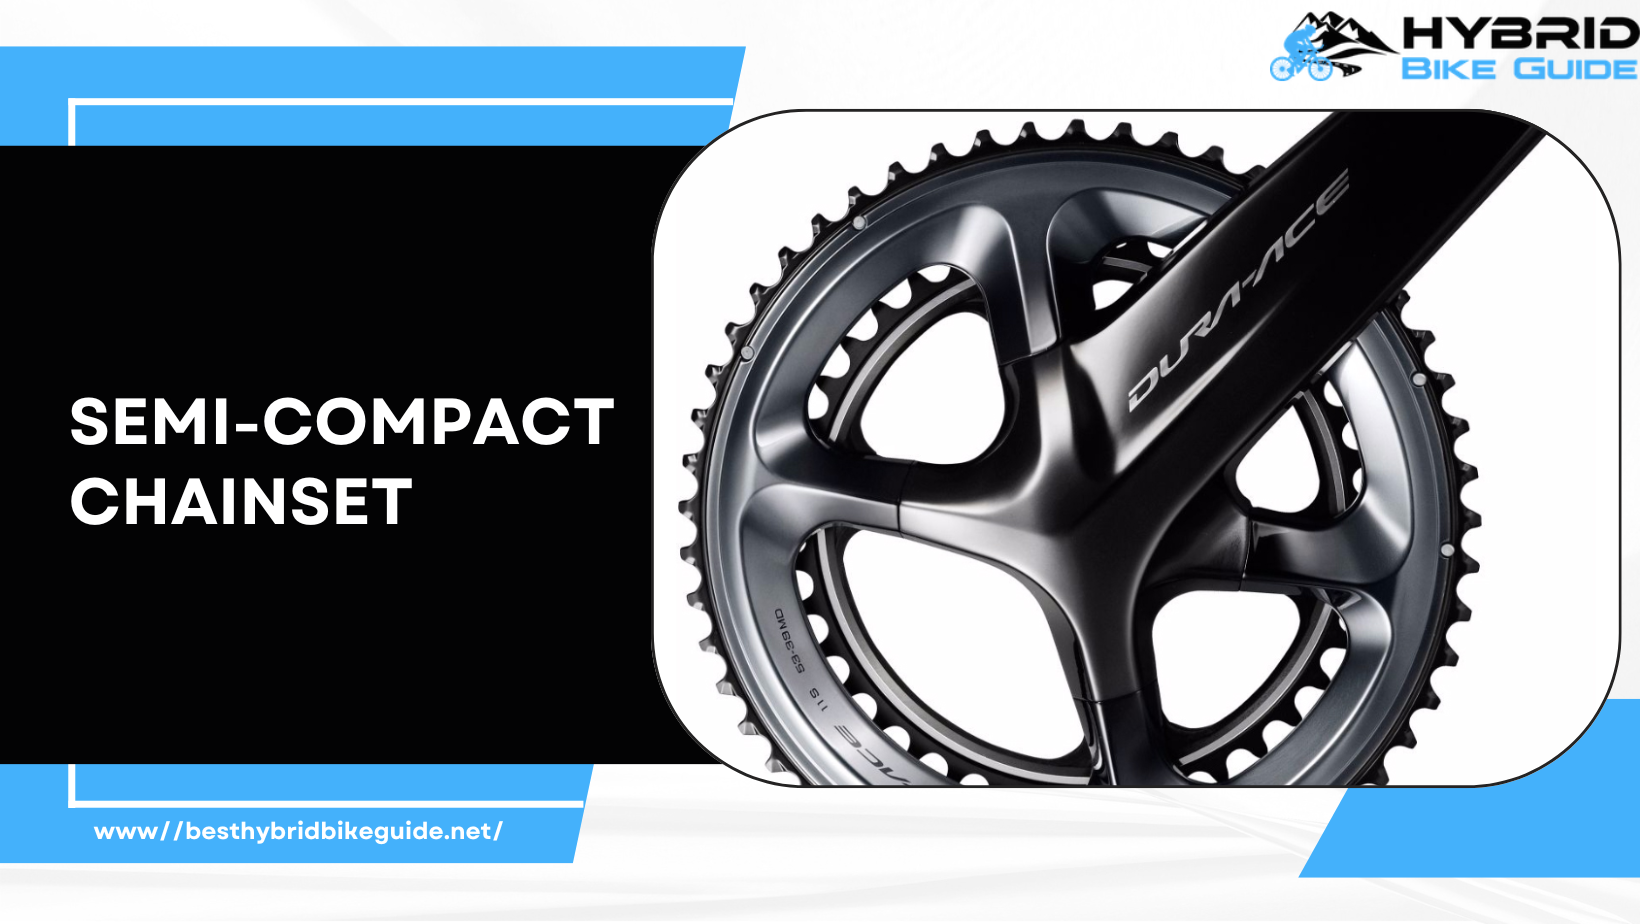 Which chainset is suitable for you?